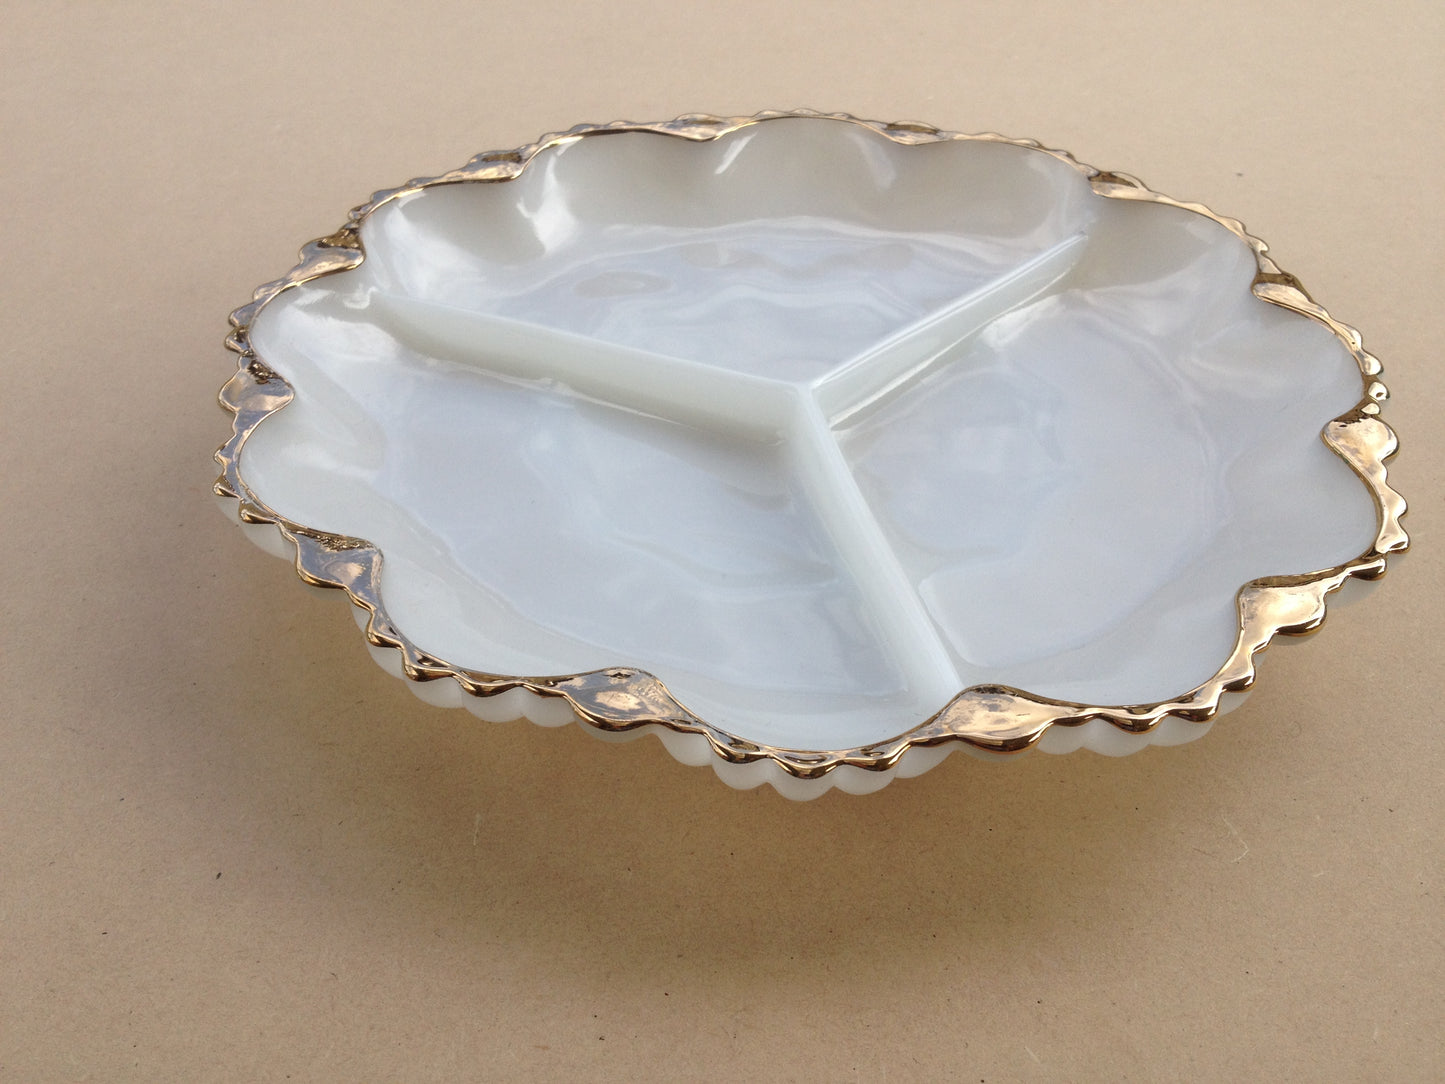 Circular White Glass Serving Dish with Gold Edge